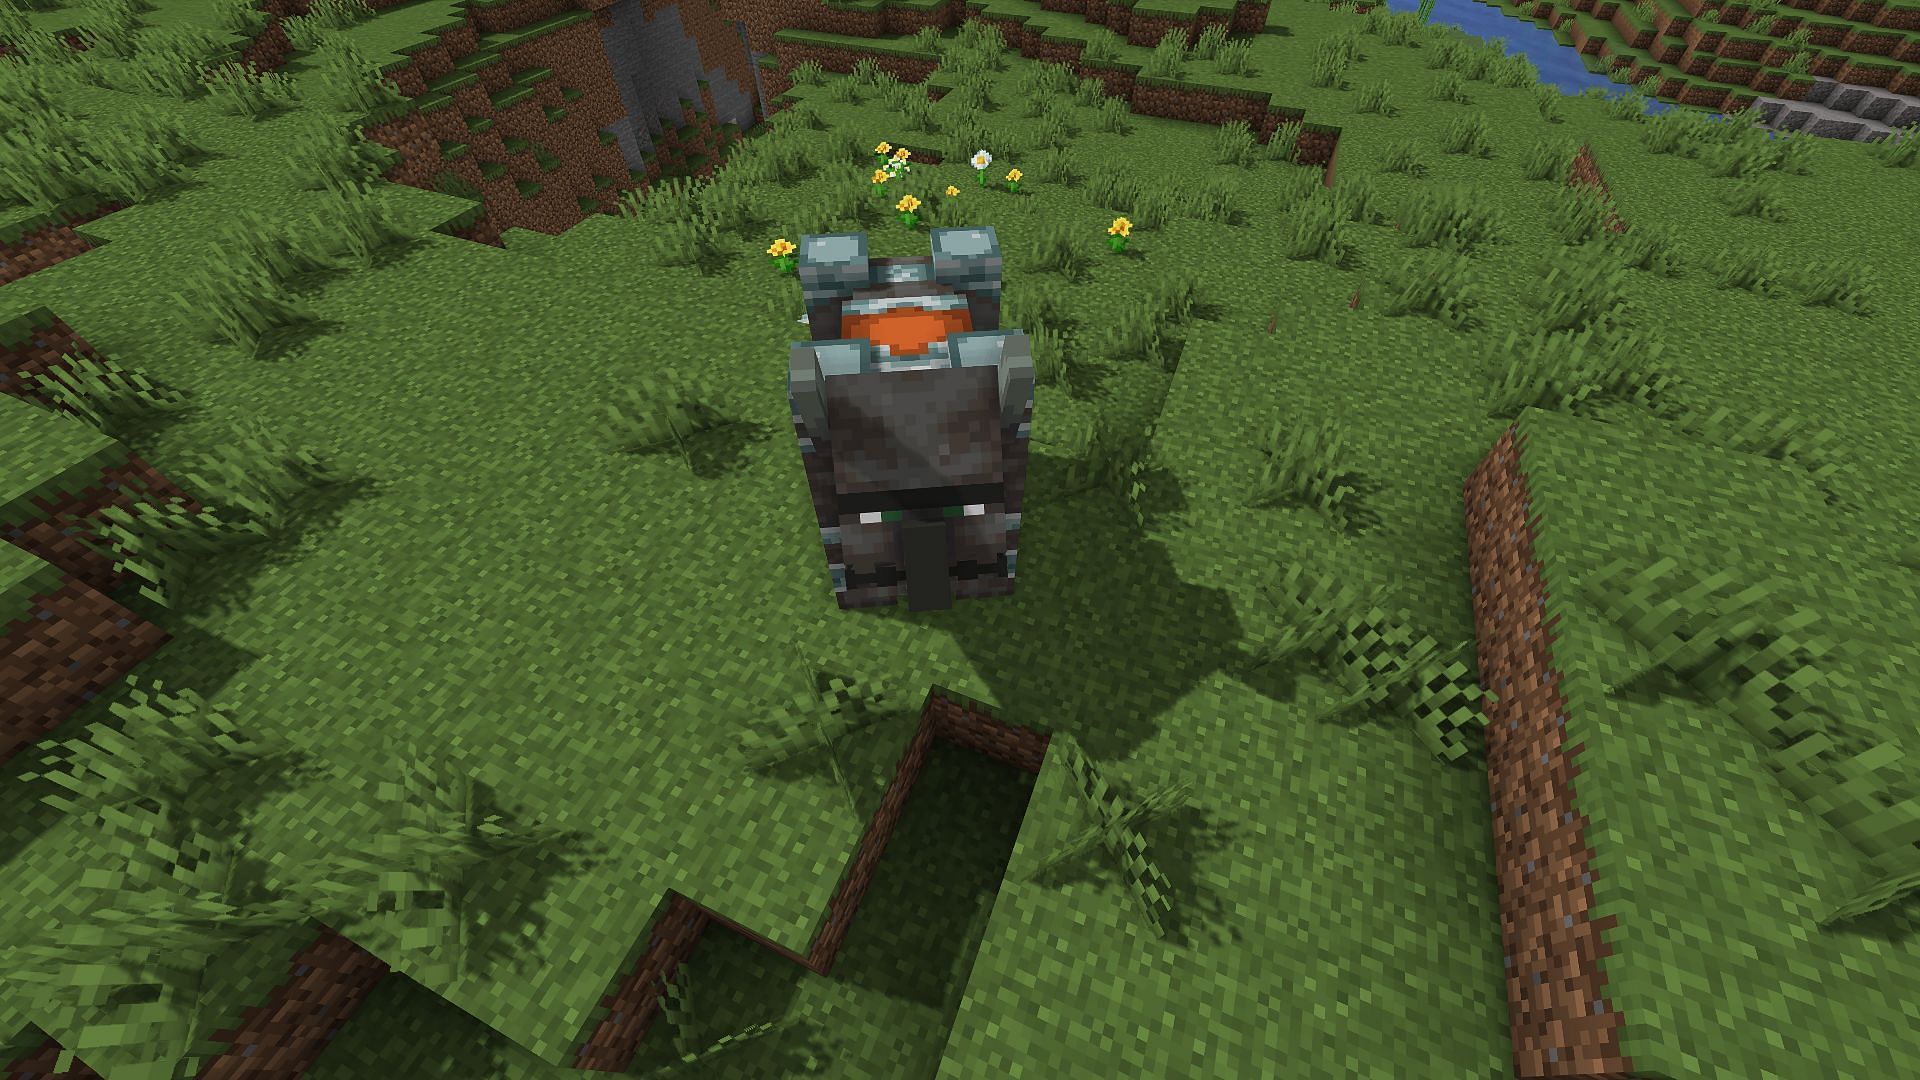 A ravager, which will always drop a saddle when killed (Image via Minecraft)